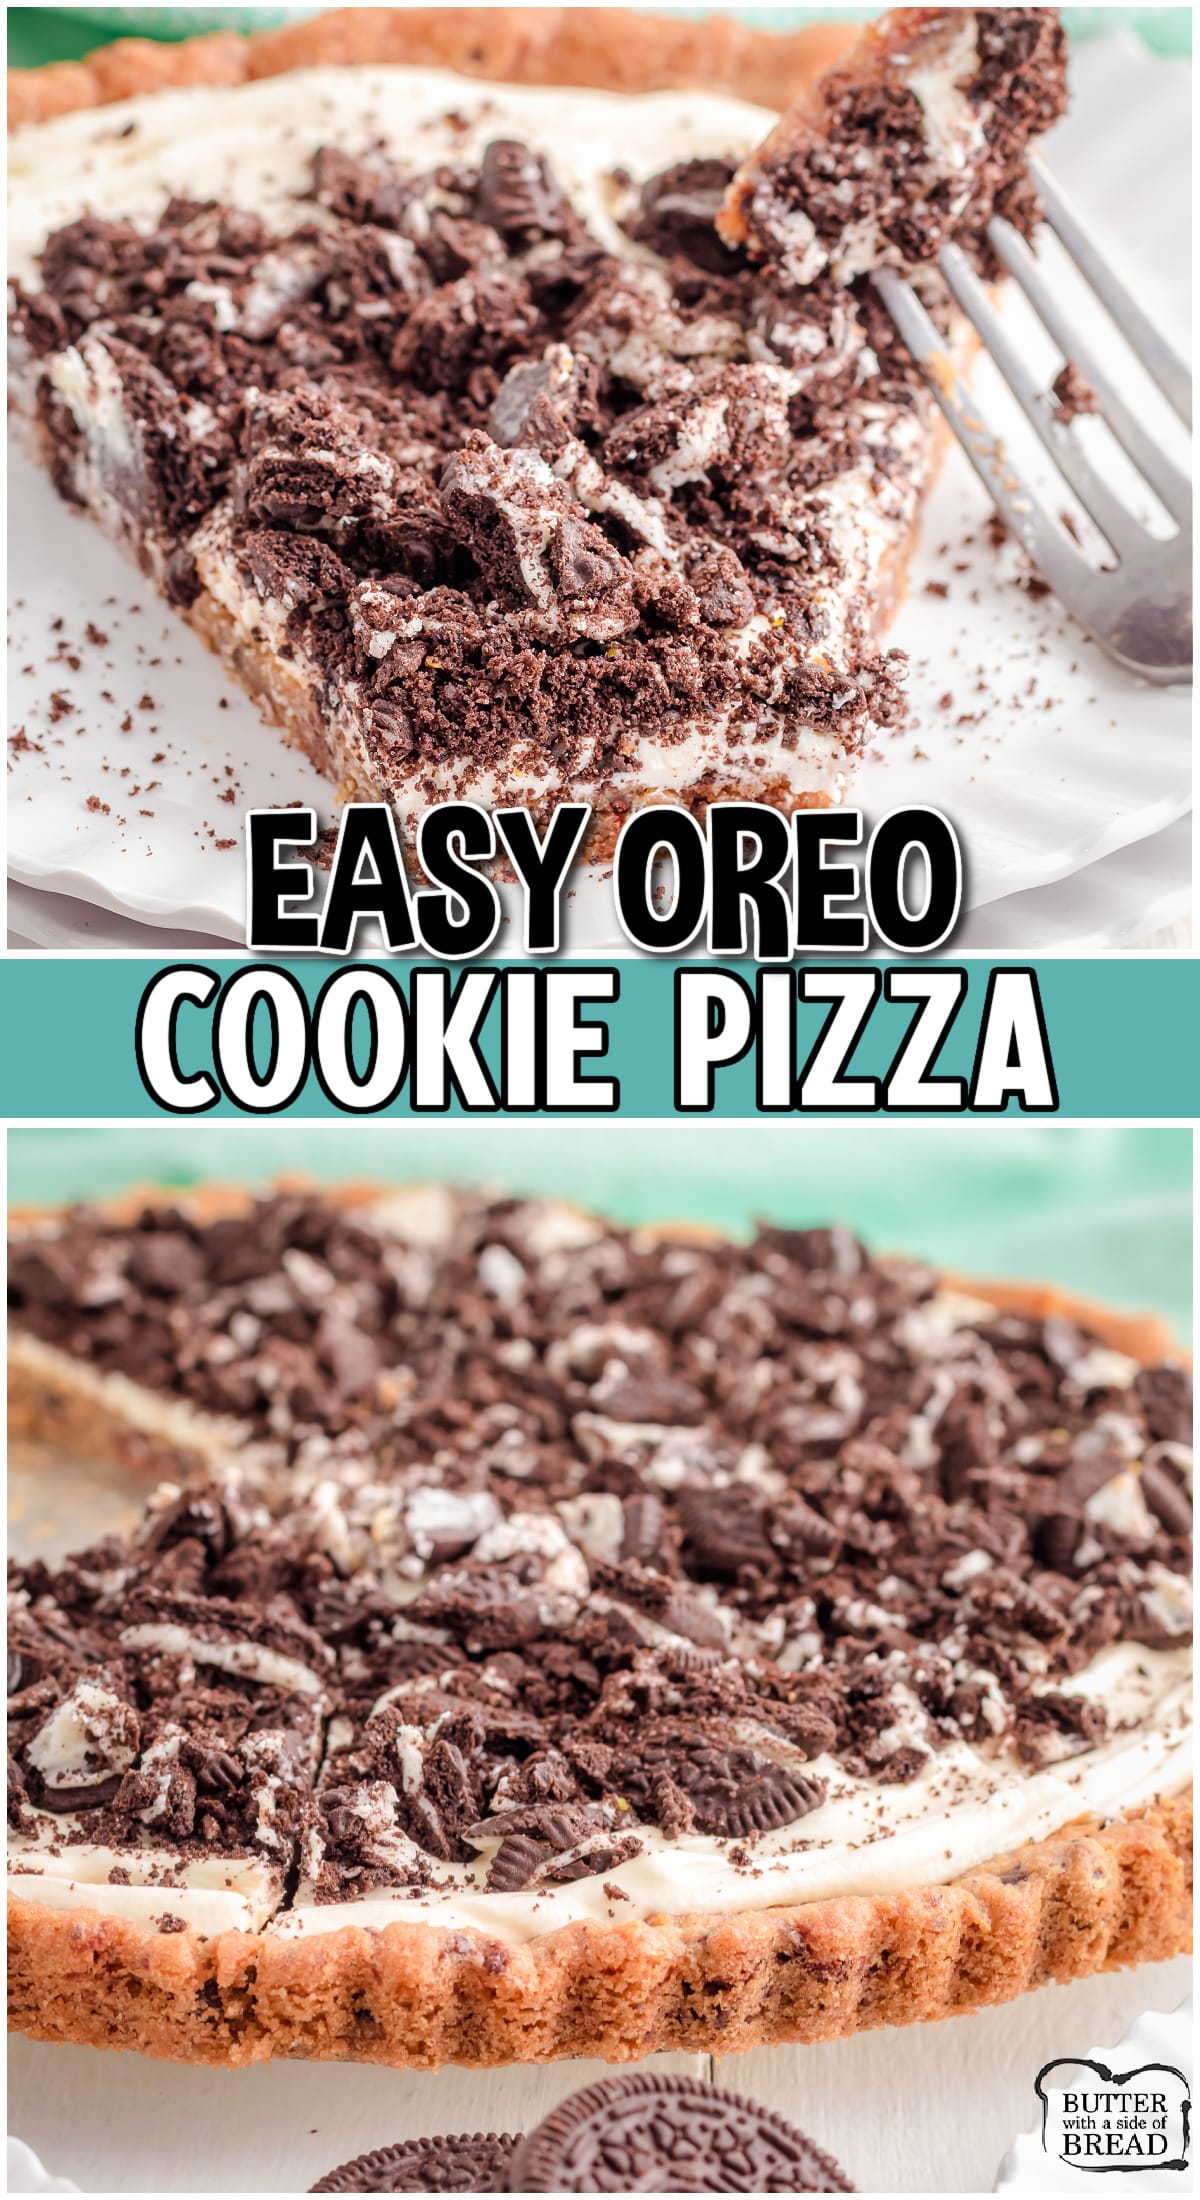 Oreo Pizza is made with chocolate chip cookie dough, baked & topped with a sweet cream cheese frosting & chopped Oreo cookies! Perfect dessert for Oreo cookie lovers!